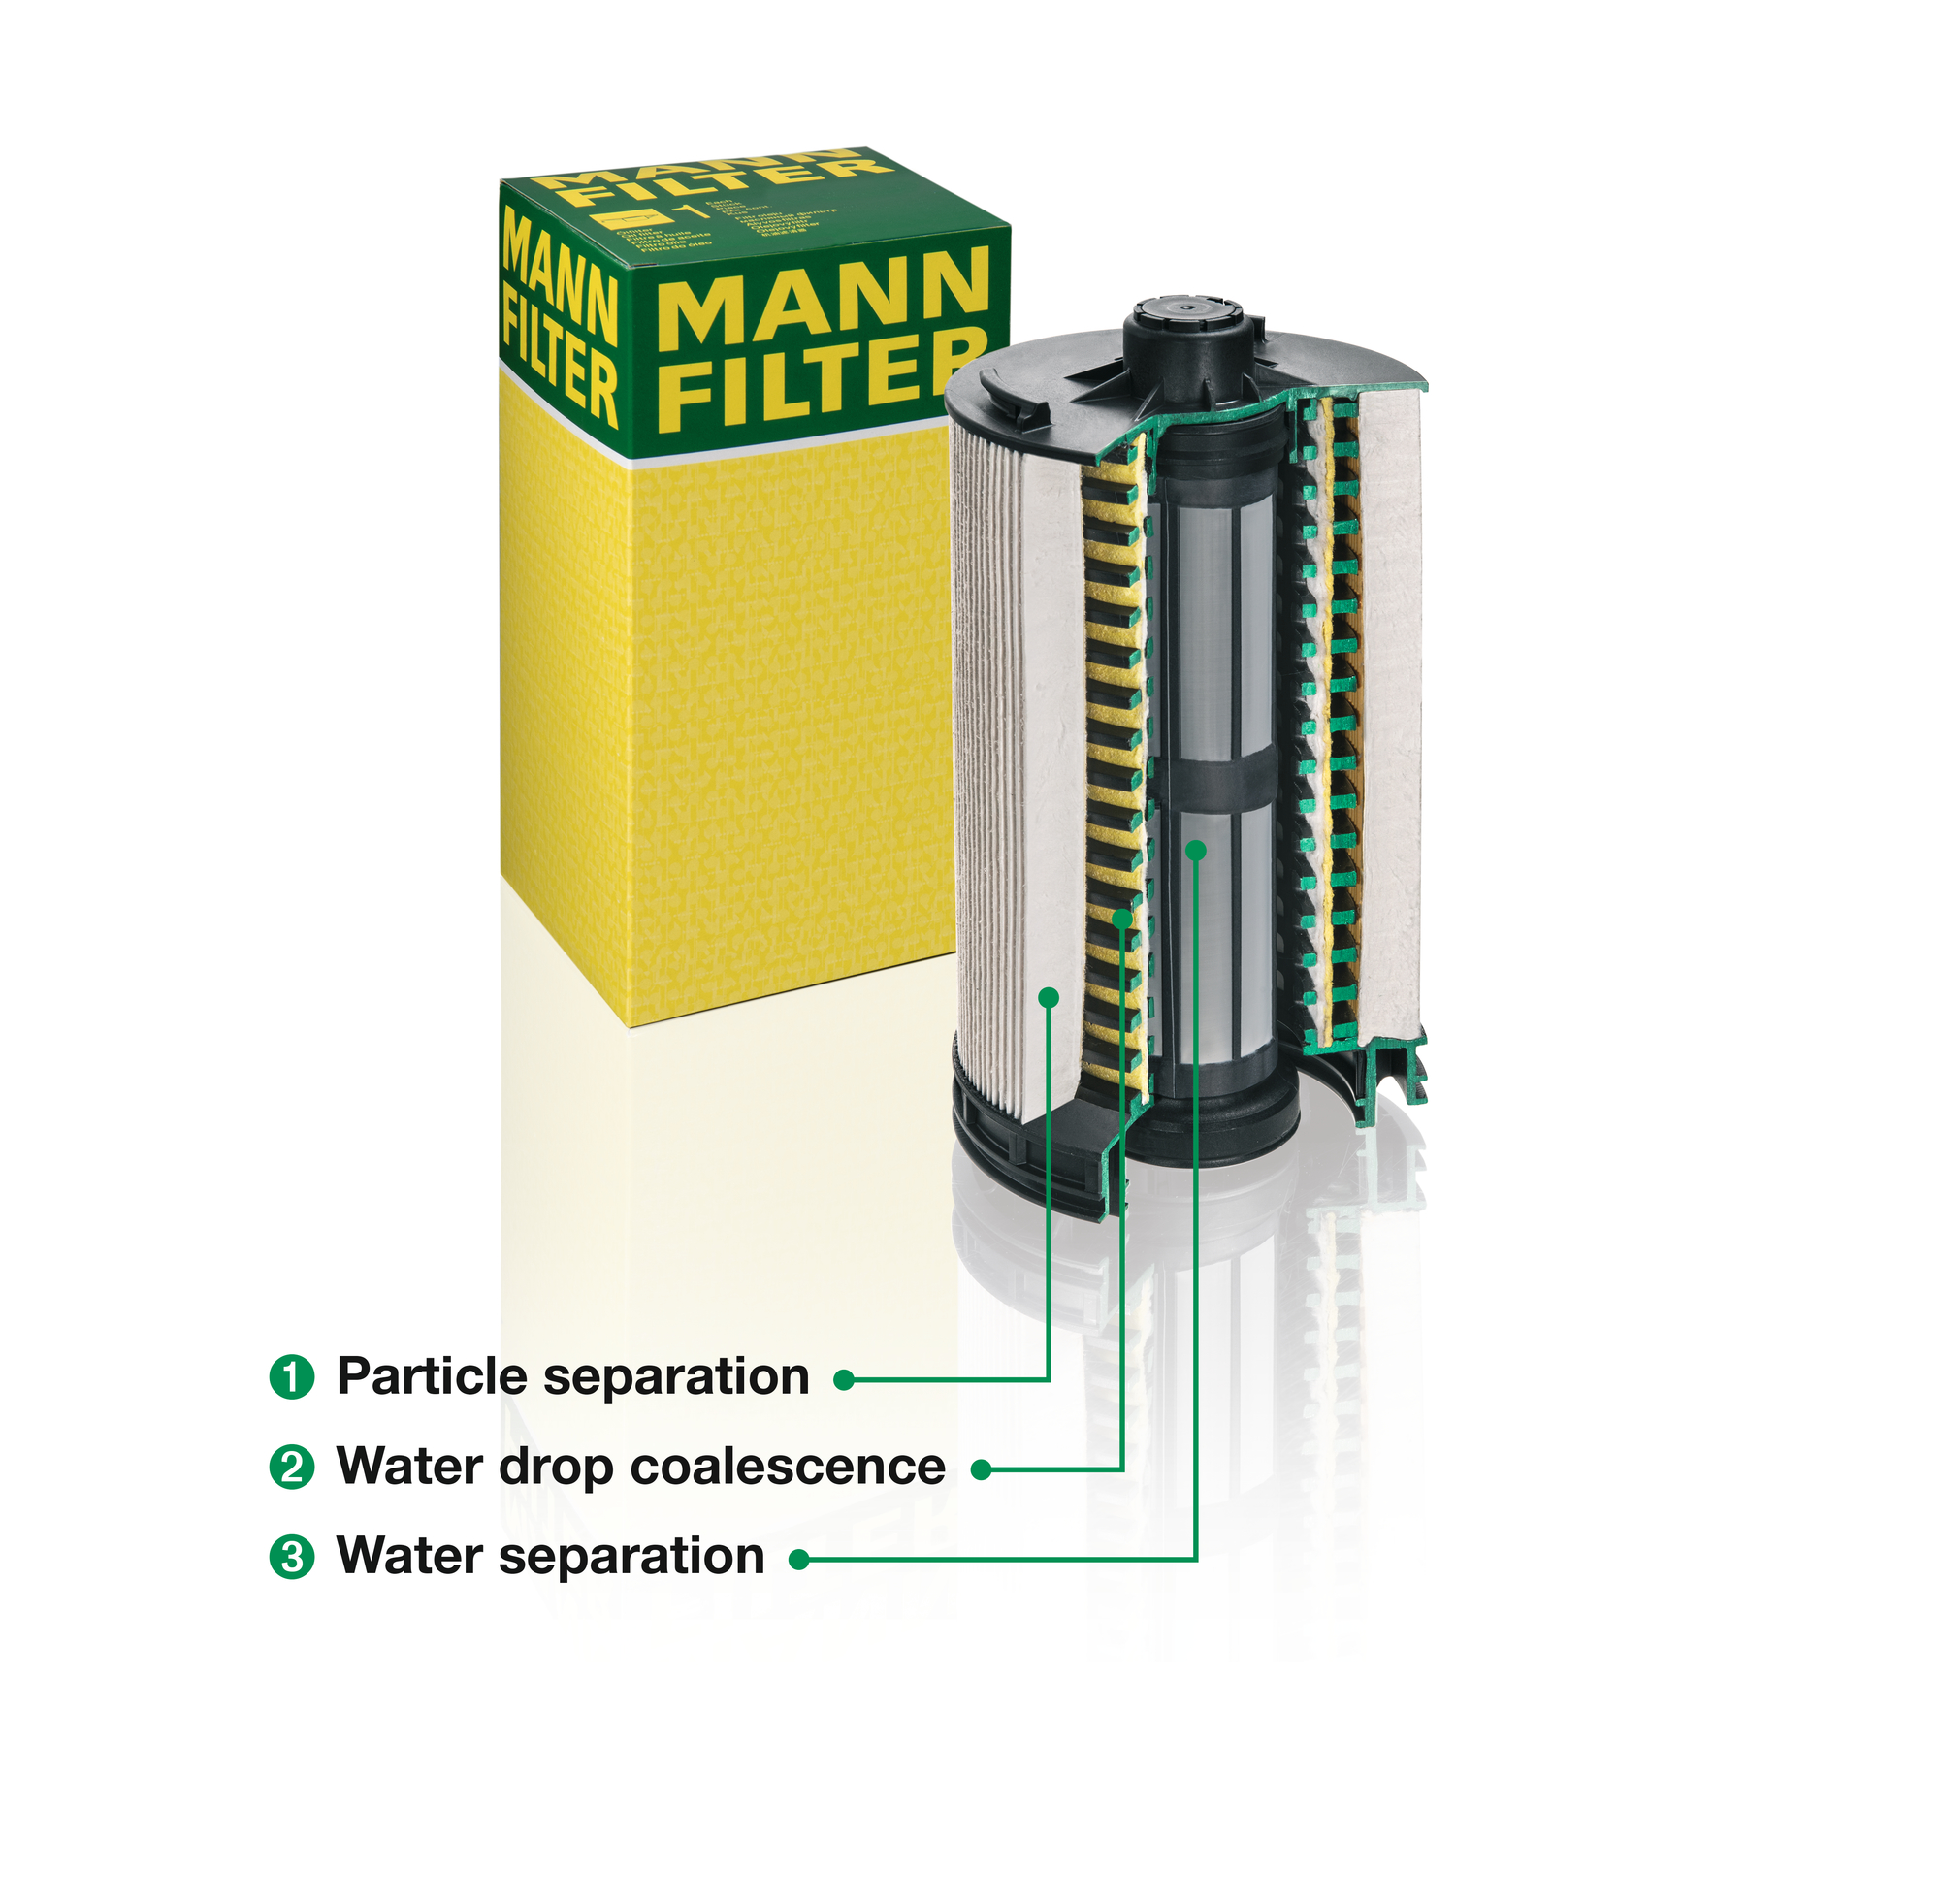 The new fuel filter protects diesel injection systems against water and dirt particles.